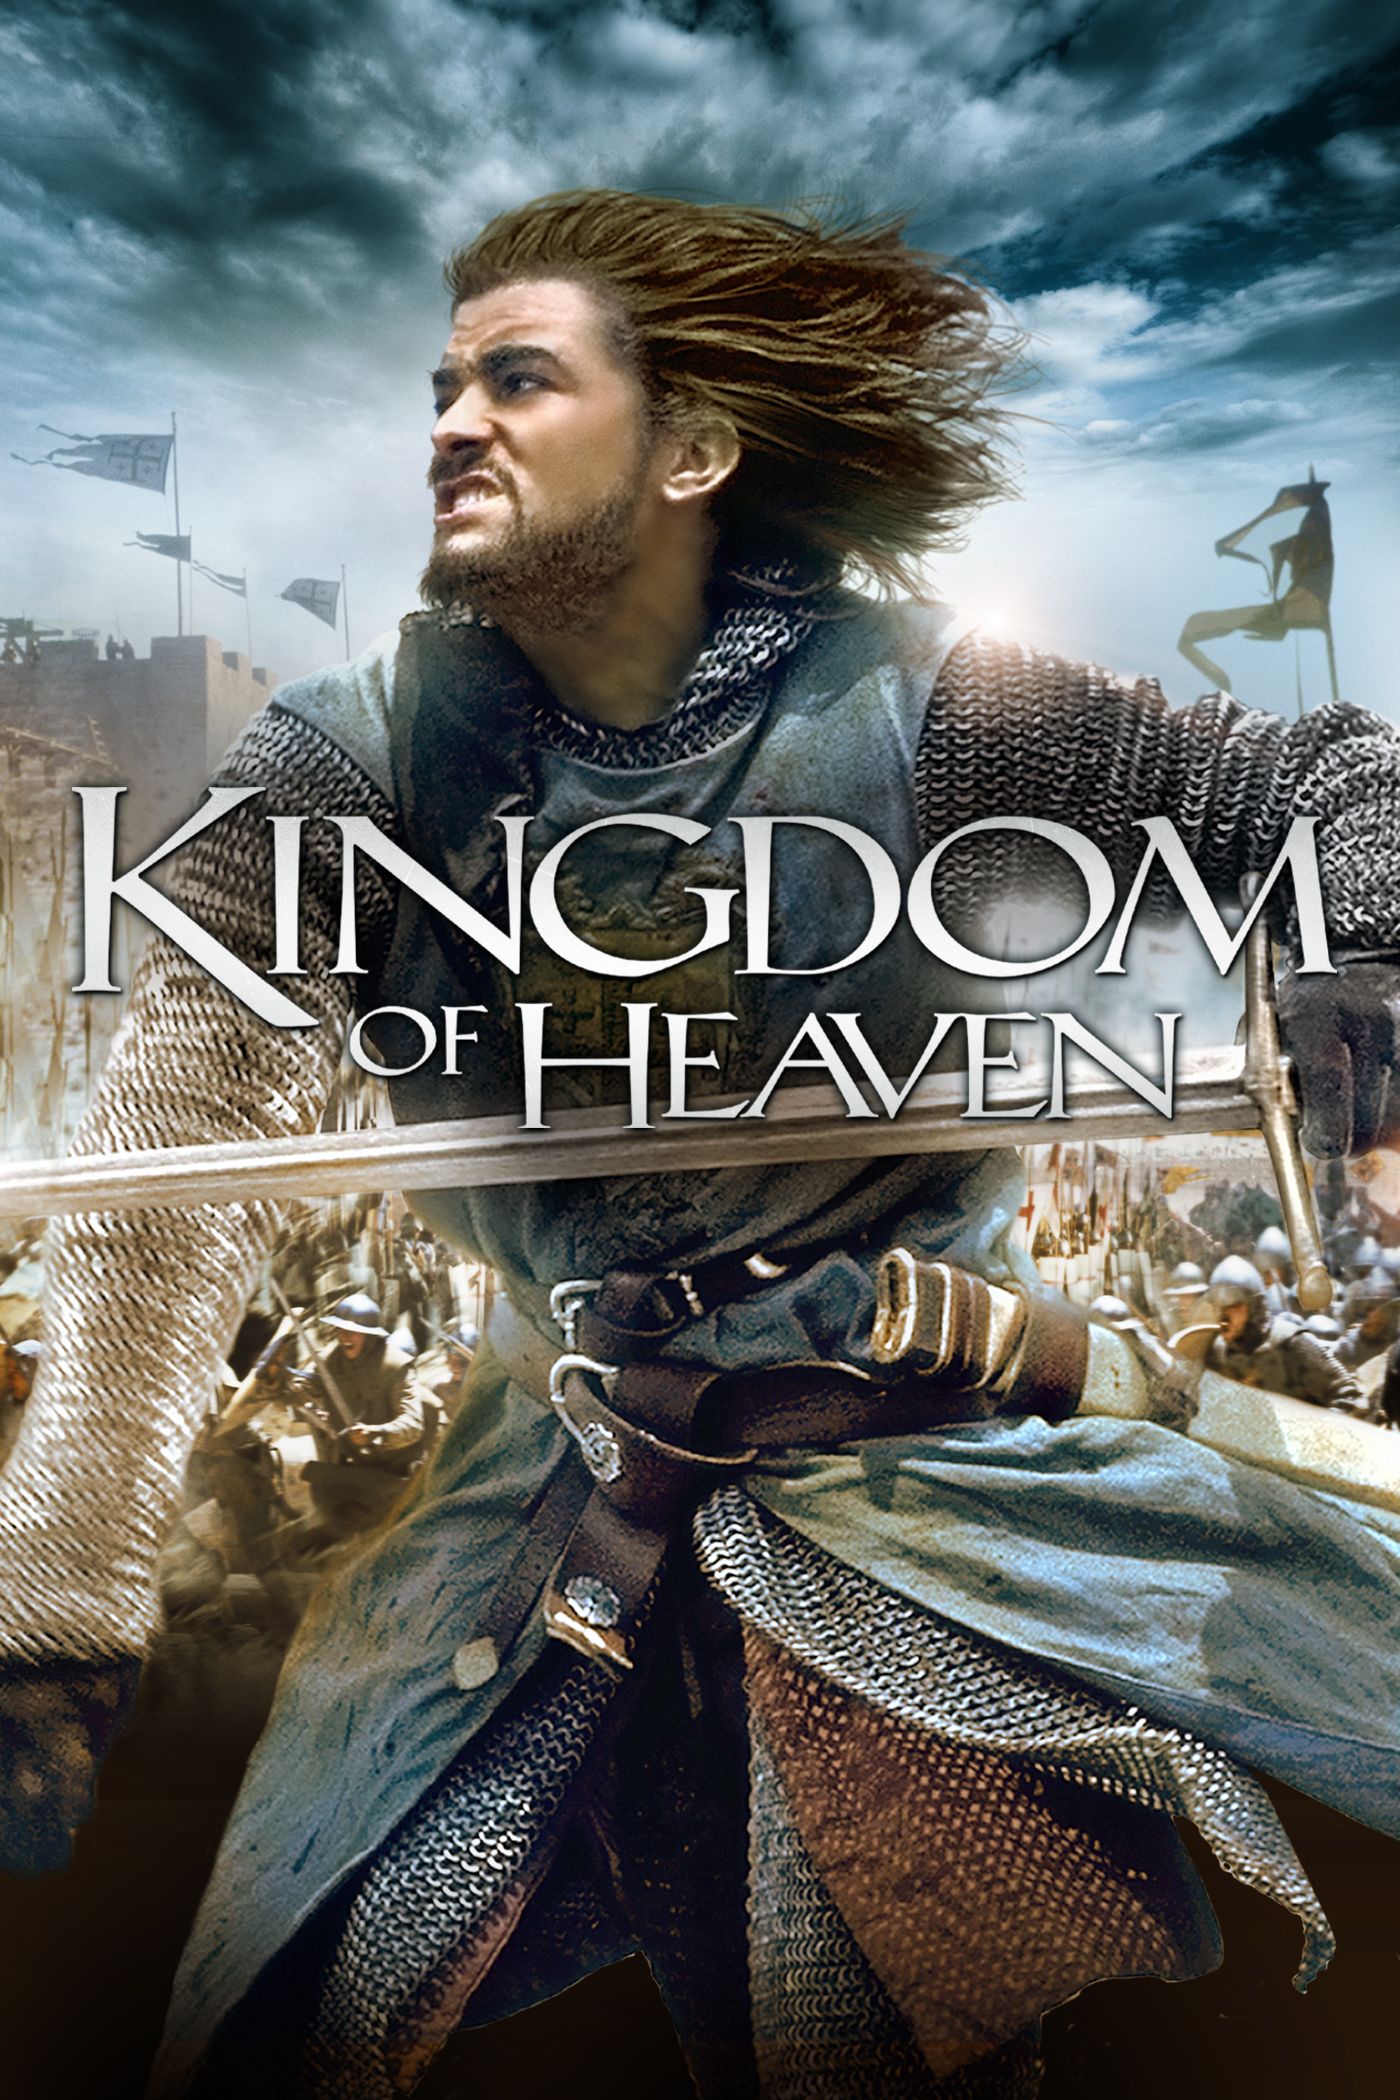 camille holder recommends battle in heaven full movie pic